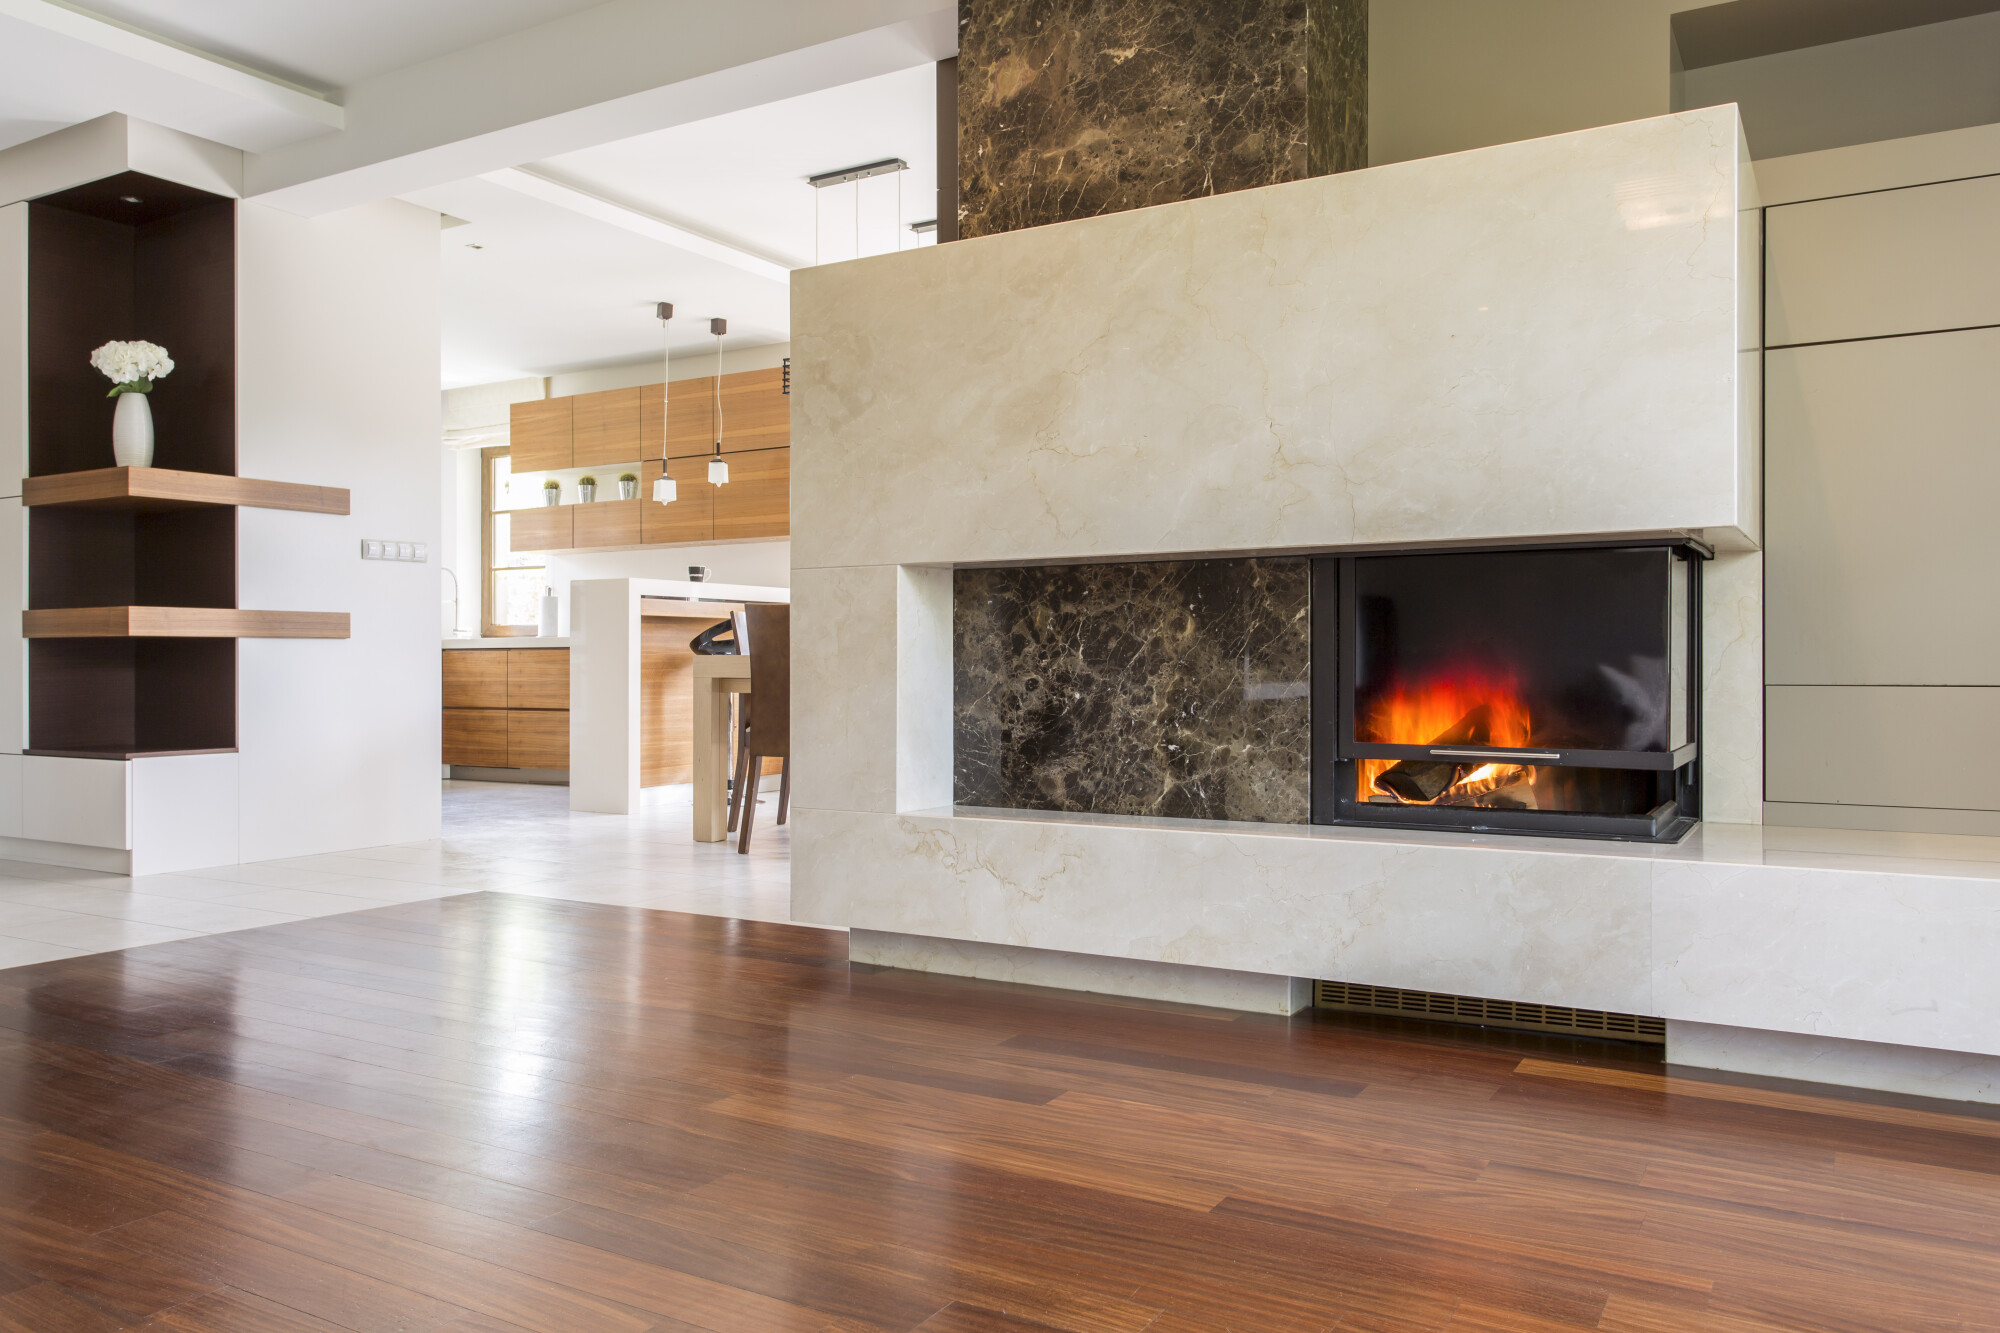 Fireplaces can offer your home both warmth and intriguing design elements. Here are some of the latest trends in modern fireplace designs.